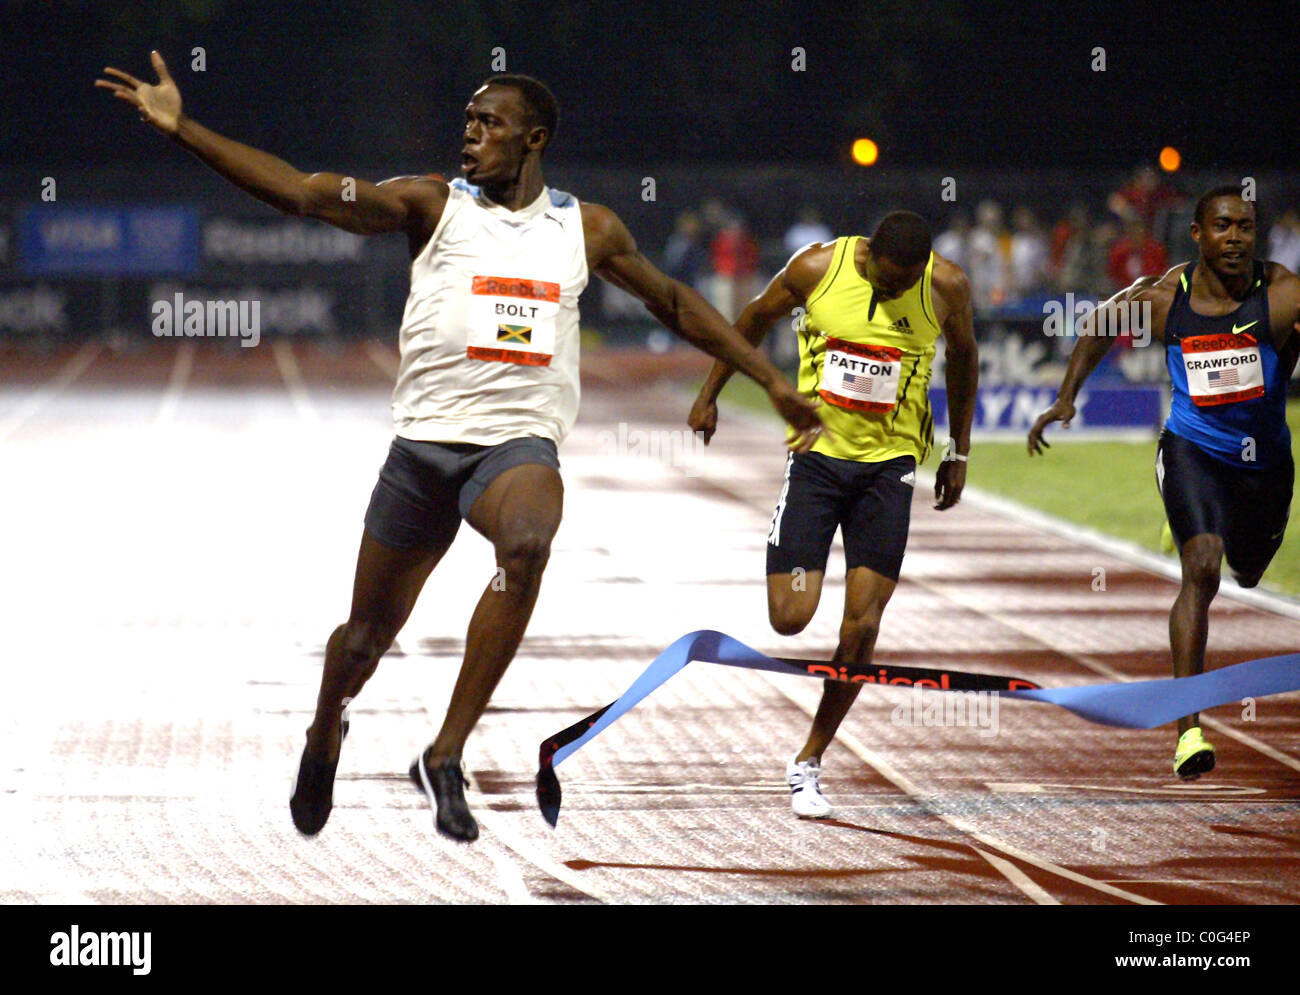 Usain Bolt wins the 100 at the Rebok Grand Prix in a new world record time  of 9.72 New York City, USA - 31.05.08 Stock Photo - Alamy